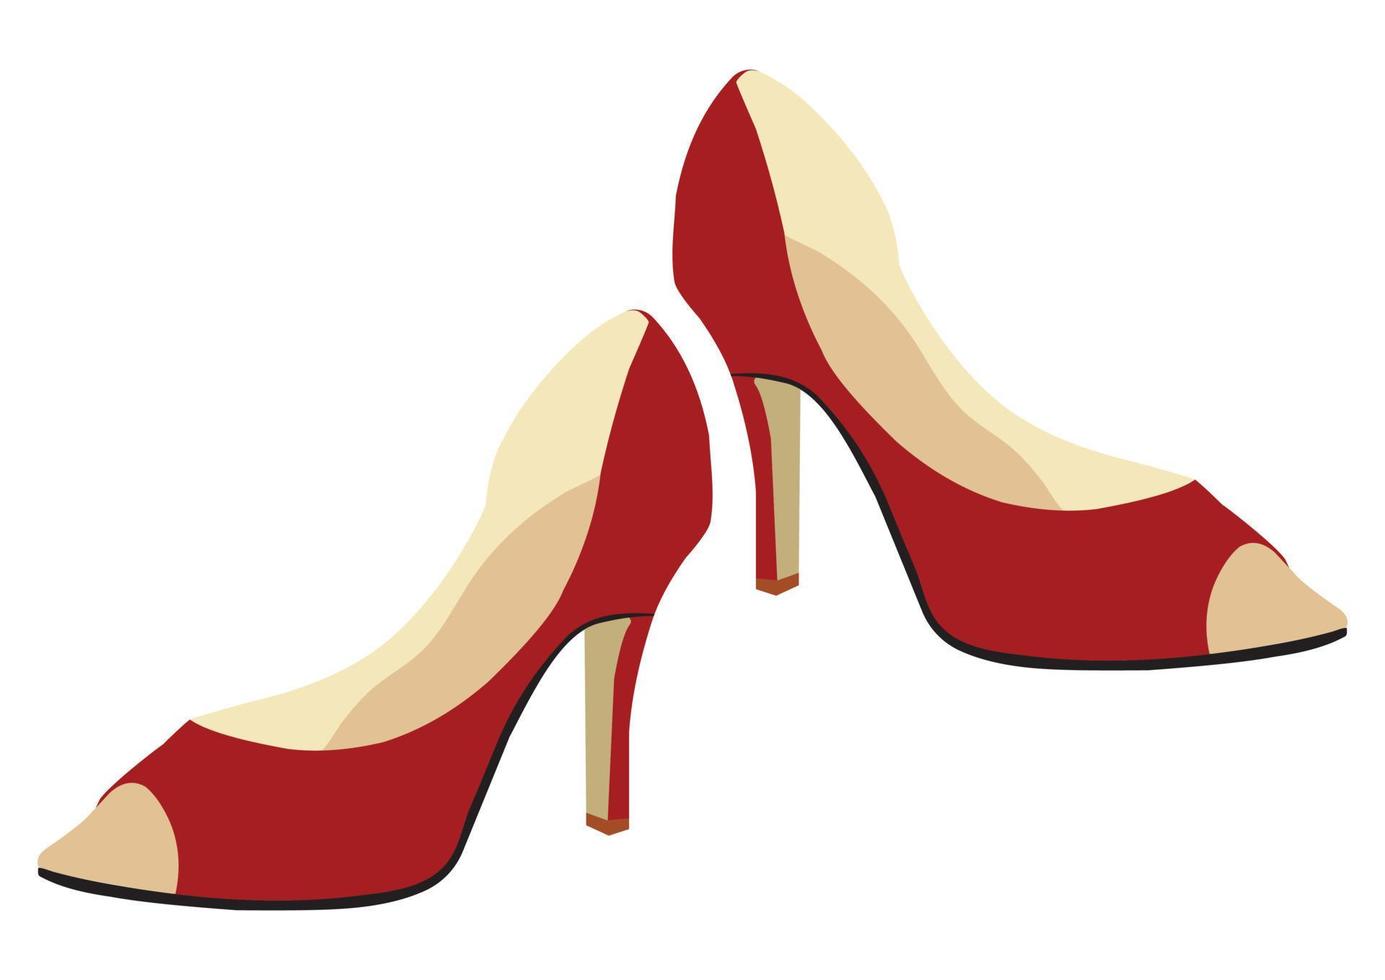 Red shoes for women on a white background. Vector illustration of modern red heels